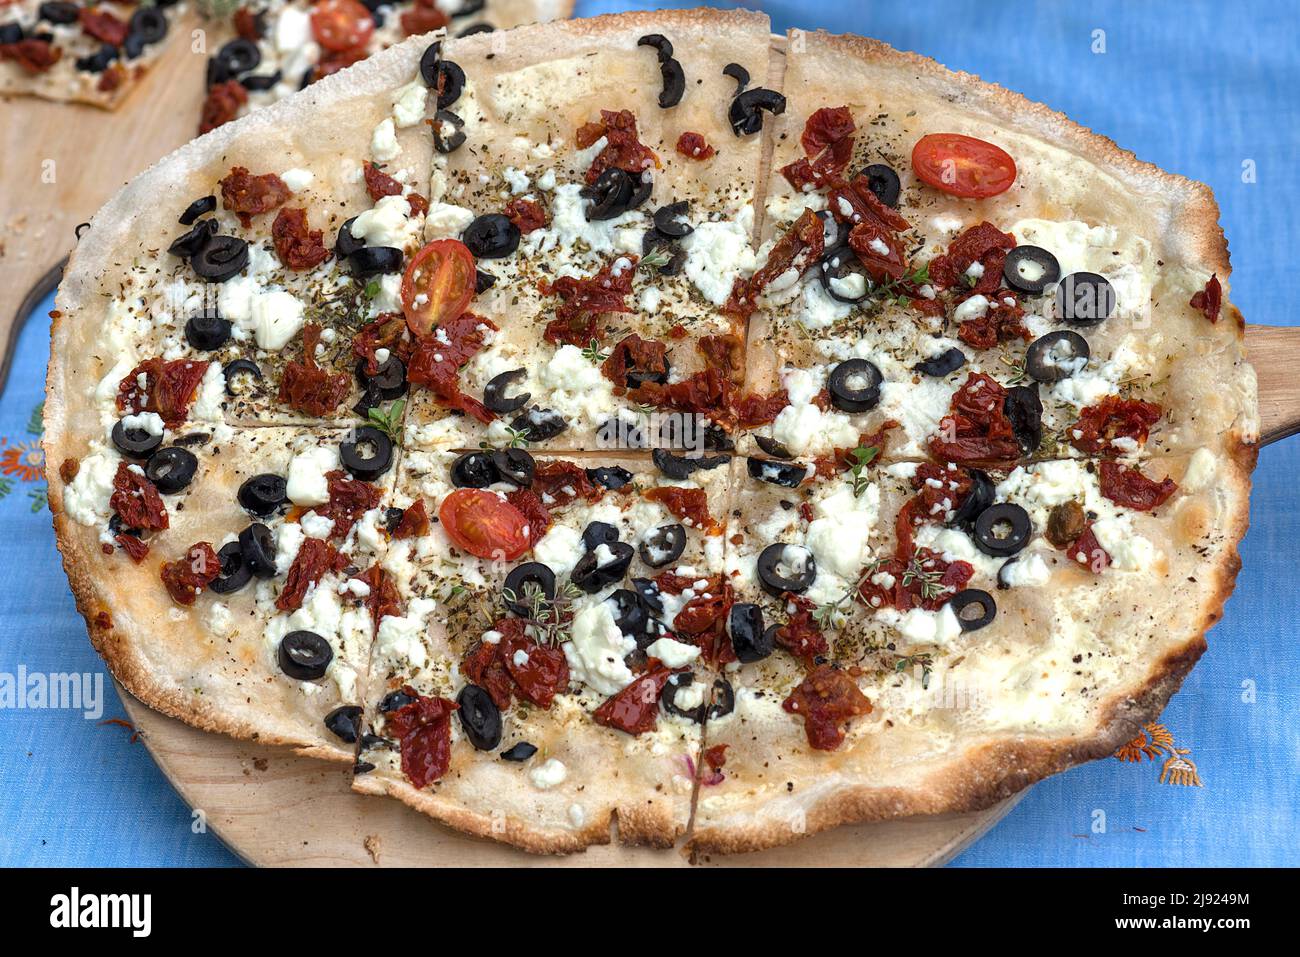 Tarte Flambee Mediterran, black olives, dried tomatoes and feta served on a wooden board, Bavaria, Germany Stock Photo